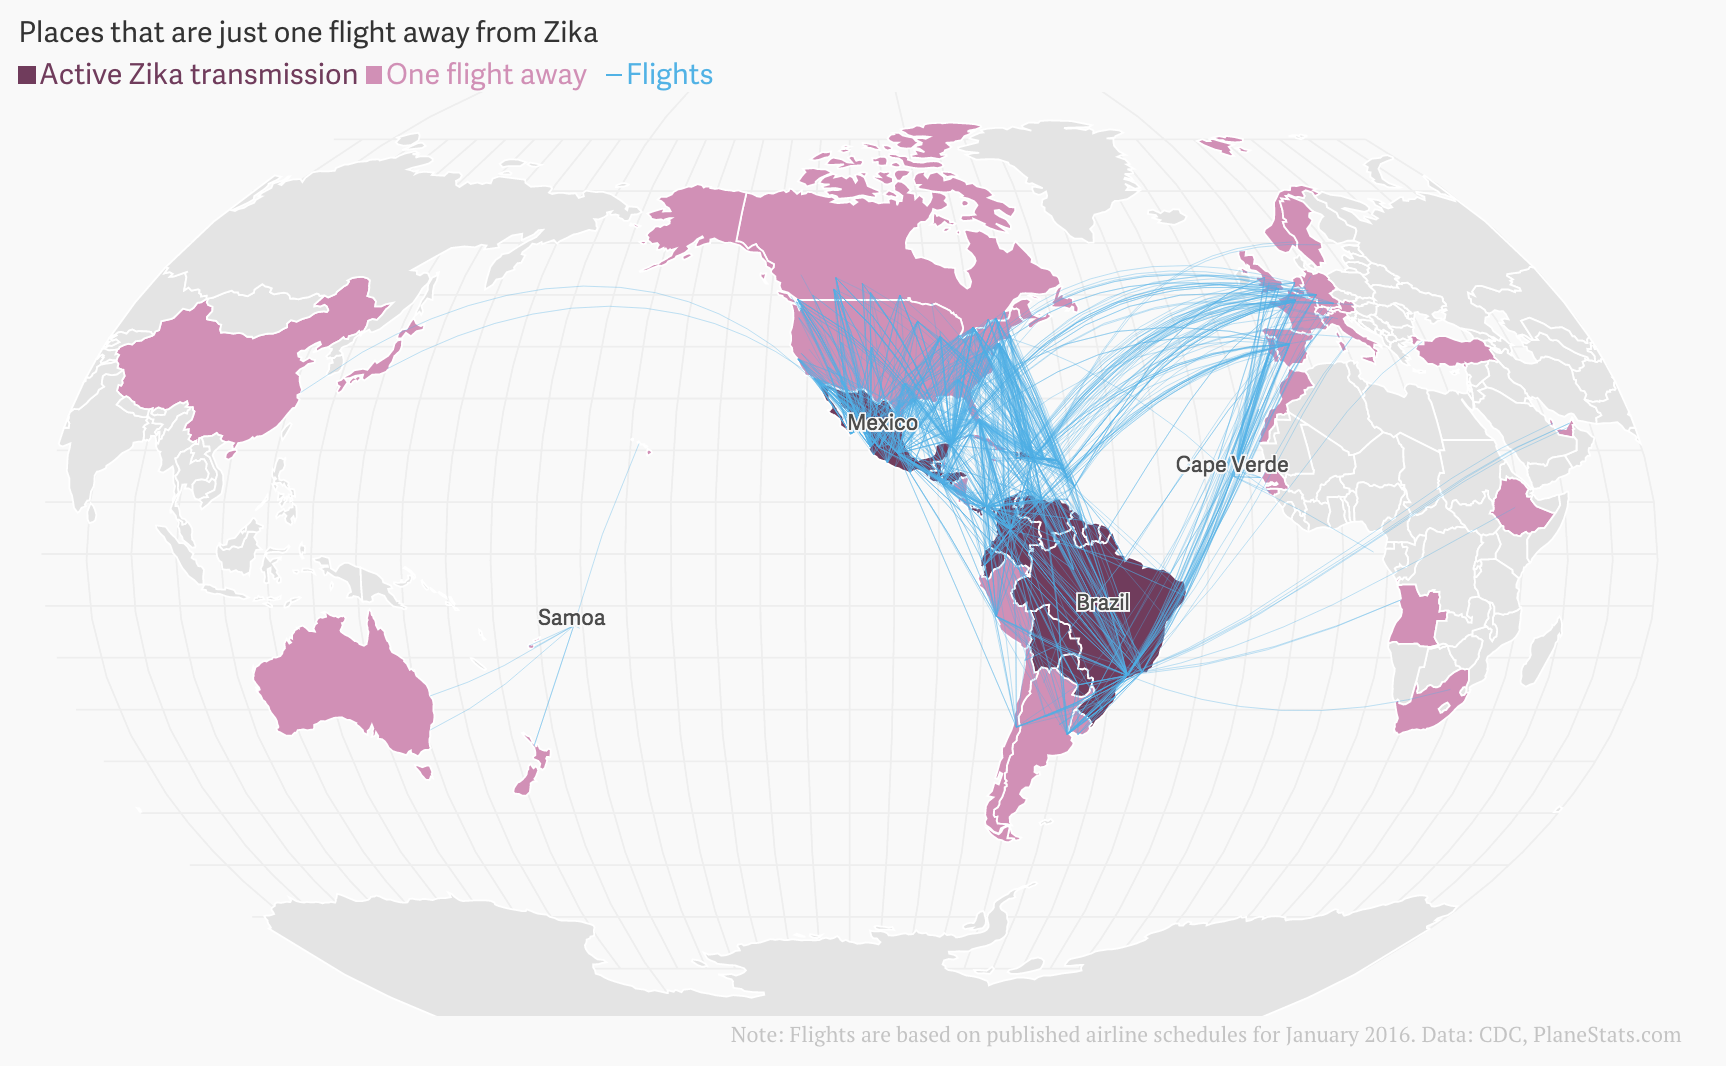 The spread of Zika virus: A roundup of visualizations - Storybench